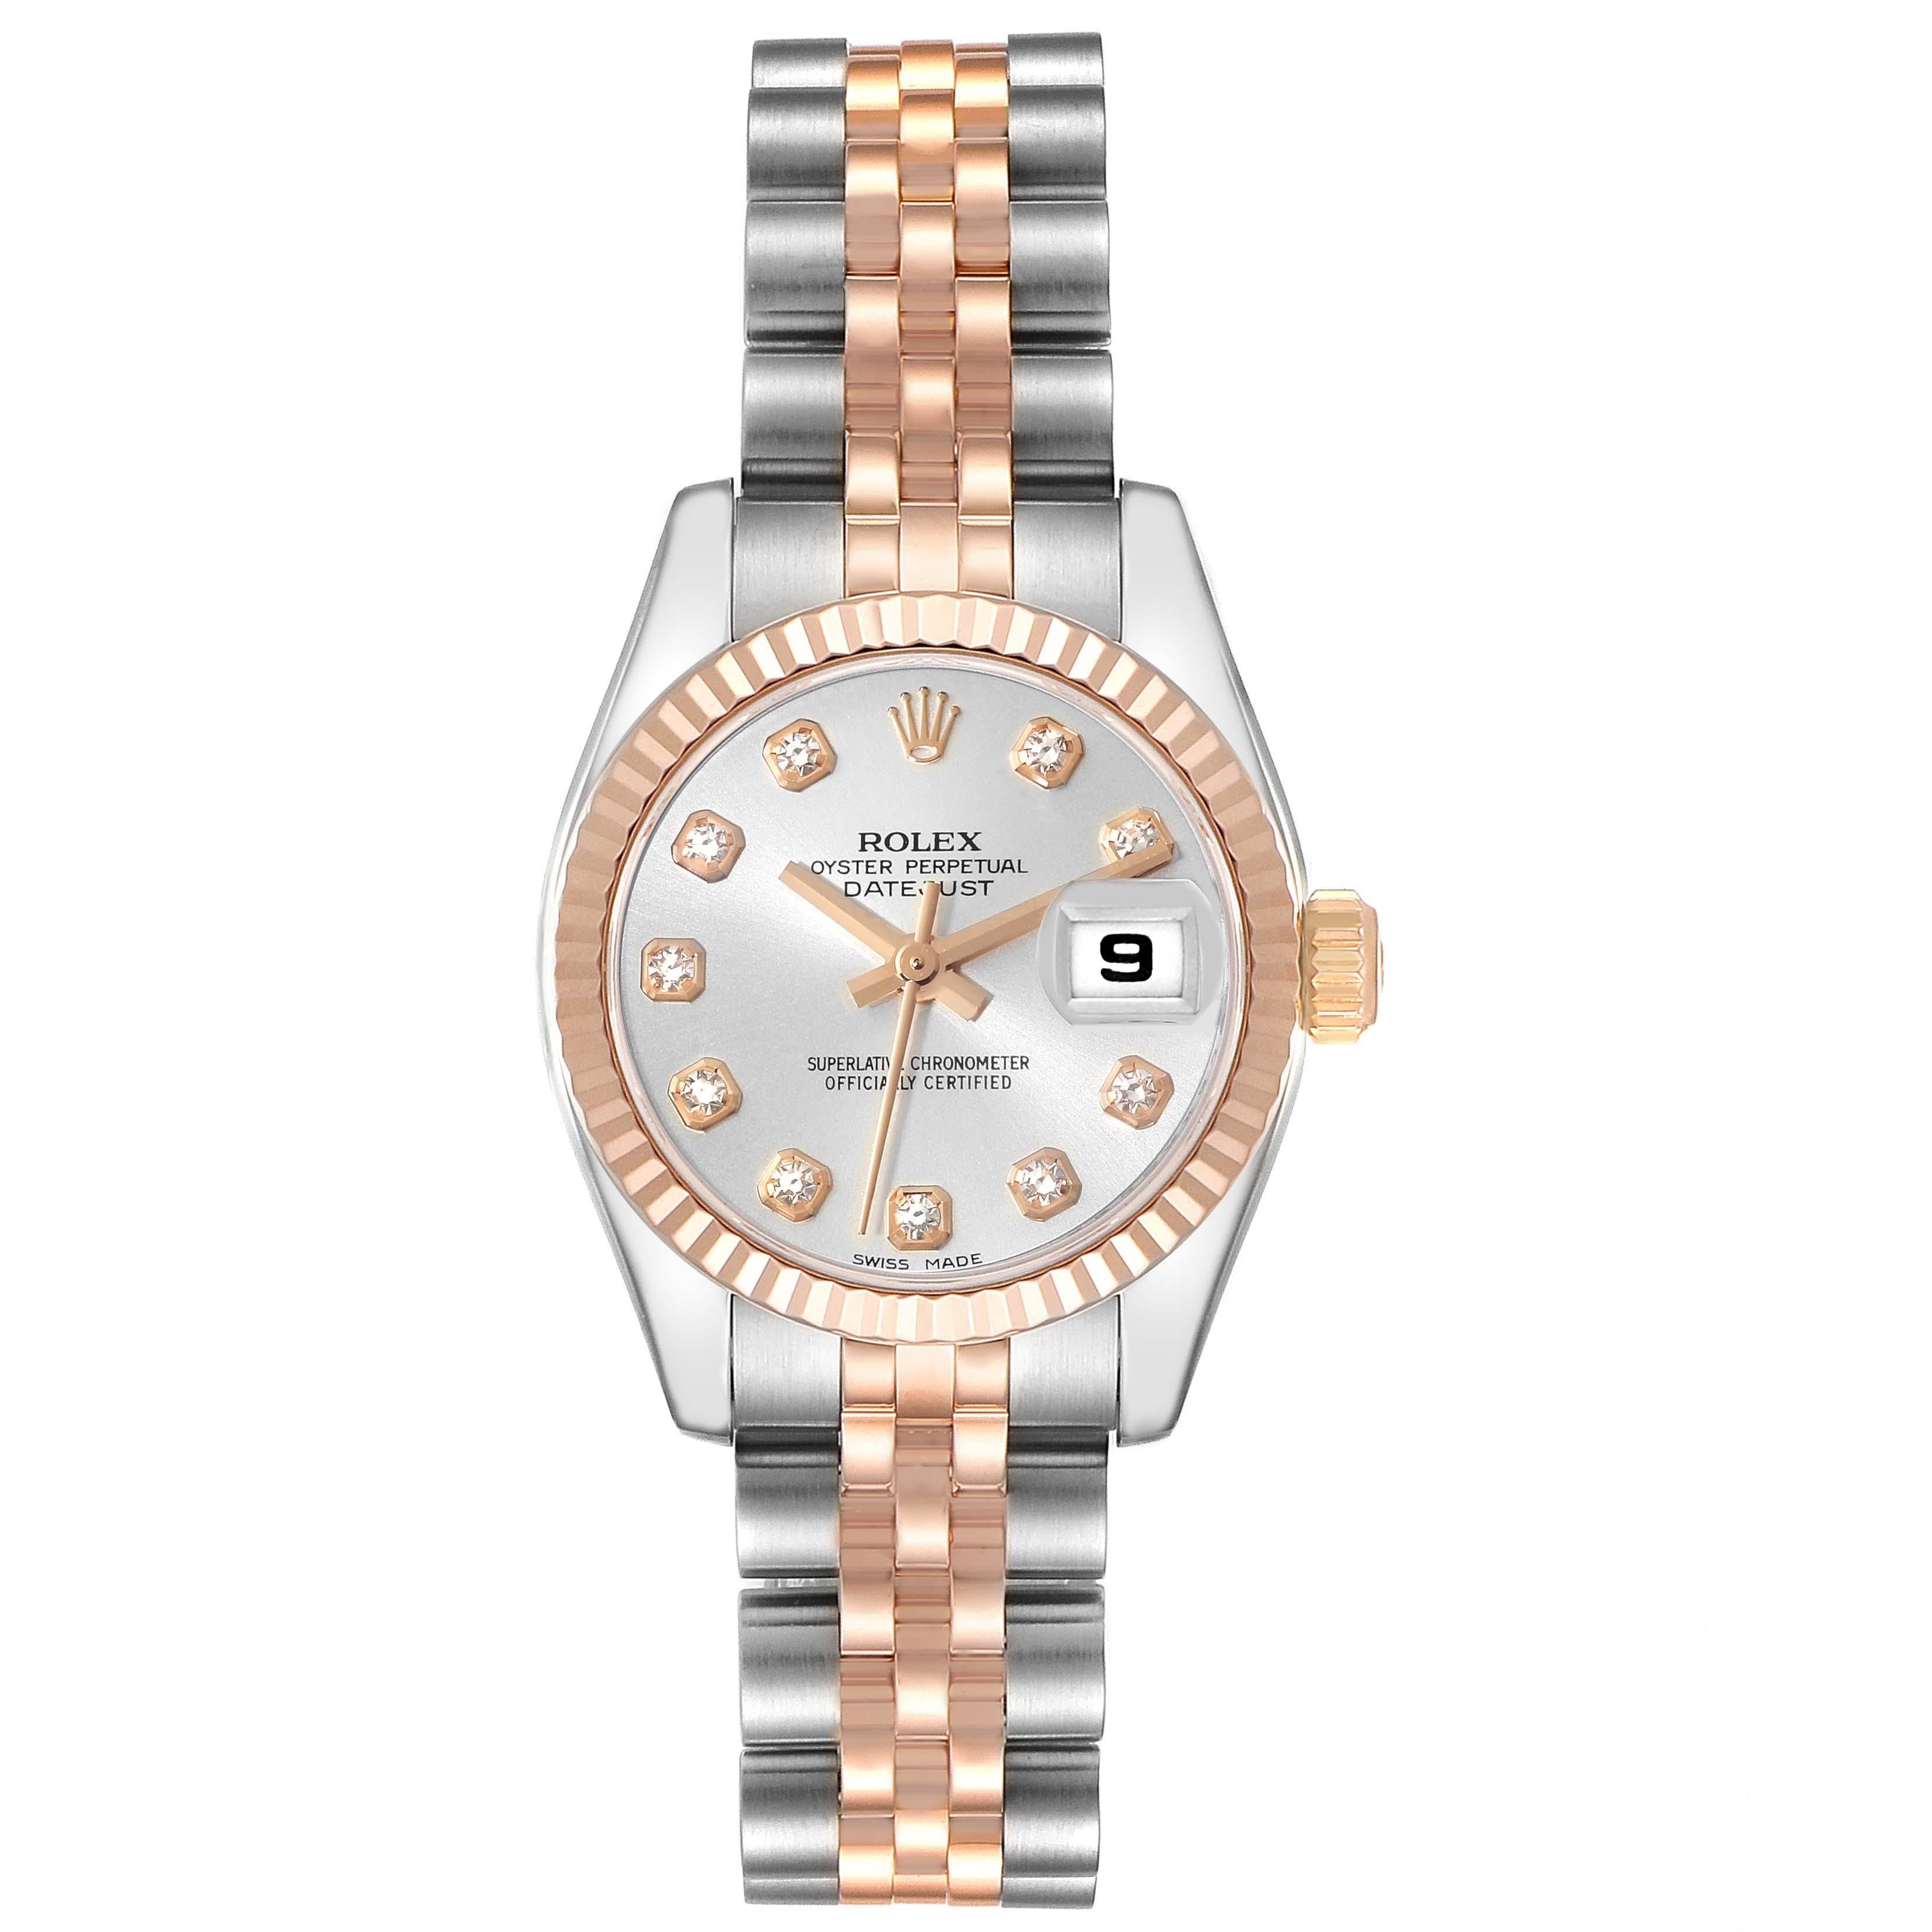 Rolex Datejust Steel Rose Gold Silver Diamond Dial Ladies Watch 179171. Officially certified chronometer automatic self-winding movement. Stainless steel oyster case 26.0 mm in diameter. Rolex logo on an 18K Everose gold crown. 18k rose gold fluted